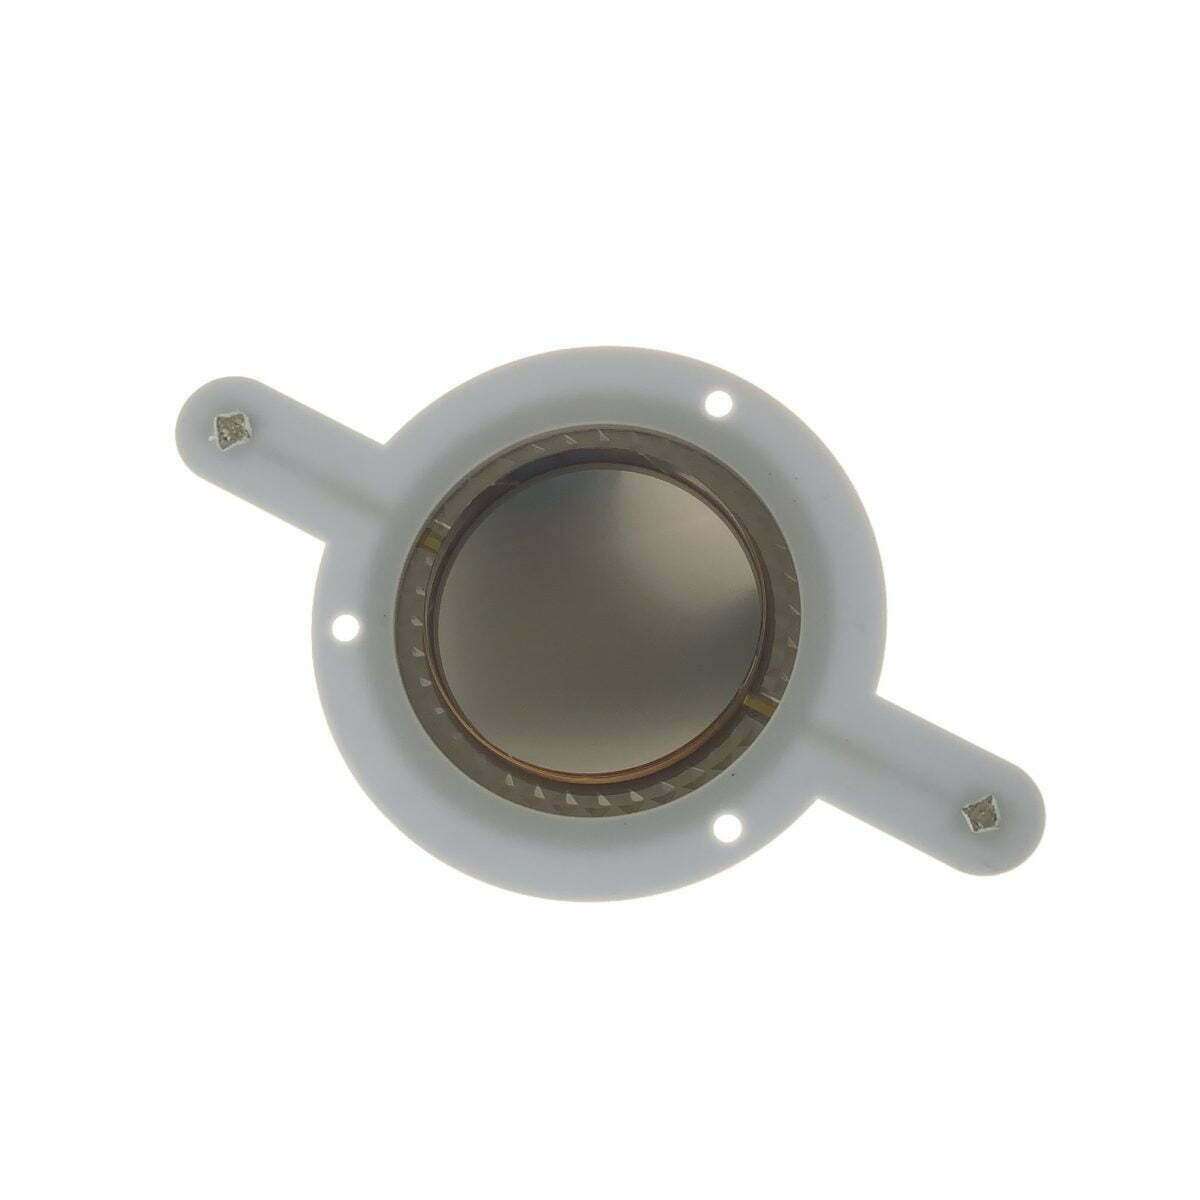 Diaphragm for JBL 2418H, 2418H-1, EON15-G2, MR9 Series, D-2418-4 on a white background